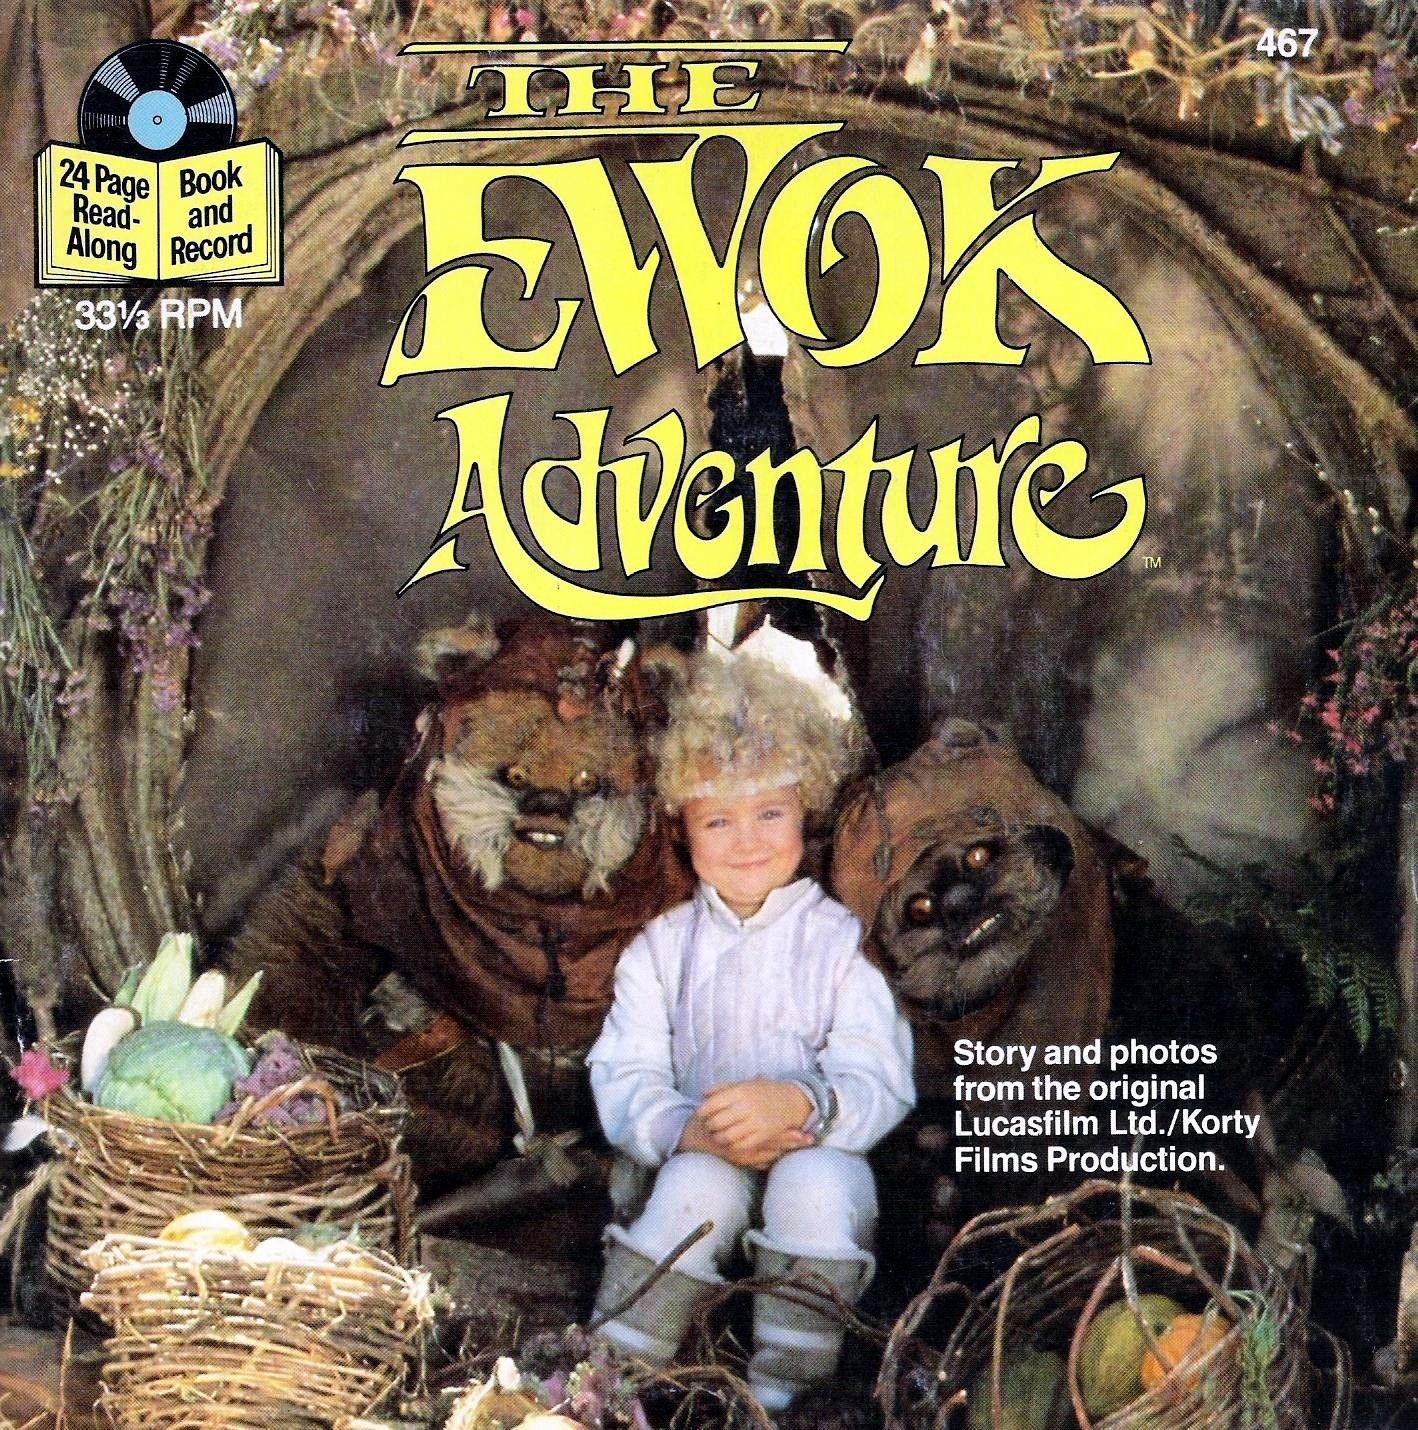 The Star Wars Trilogy. The Ewok Adventure Read Along